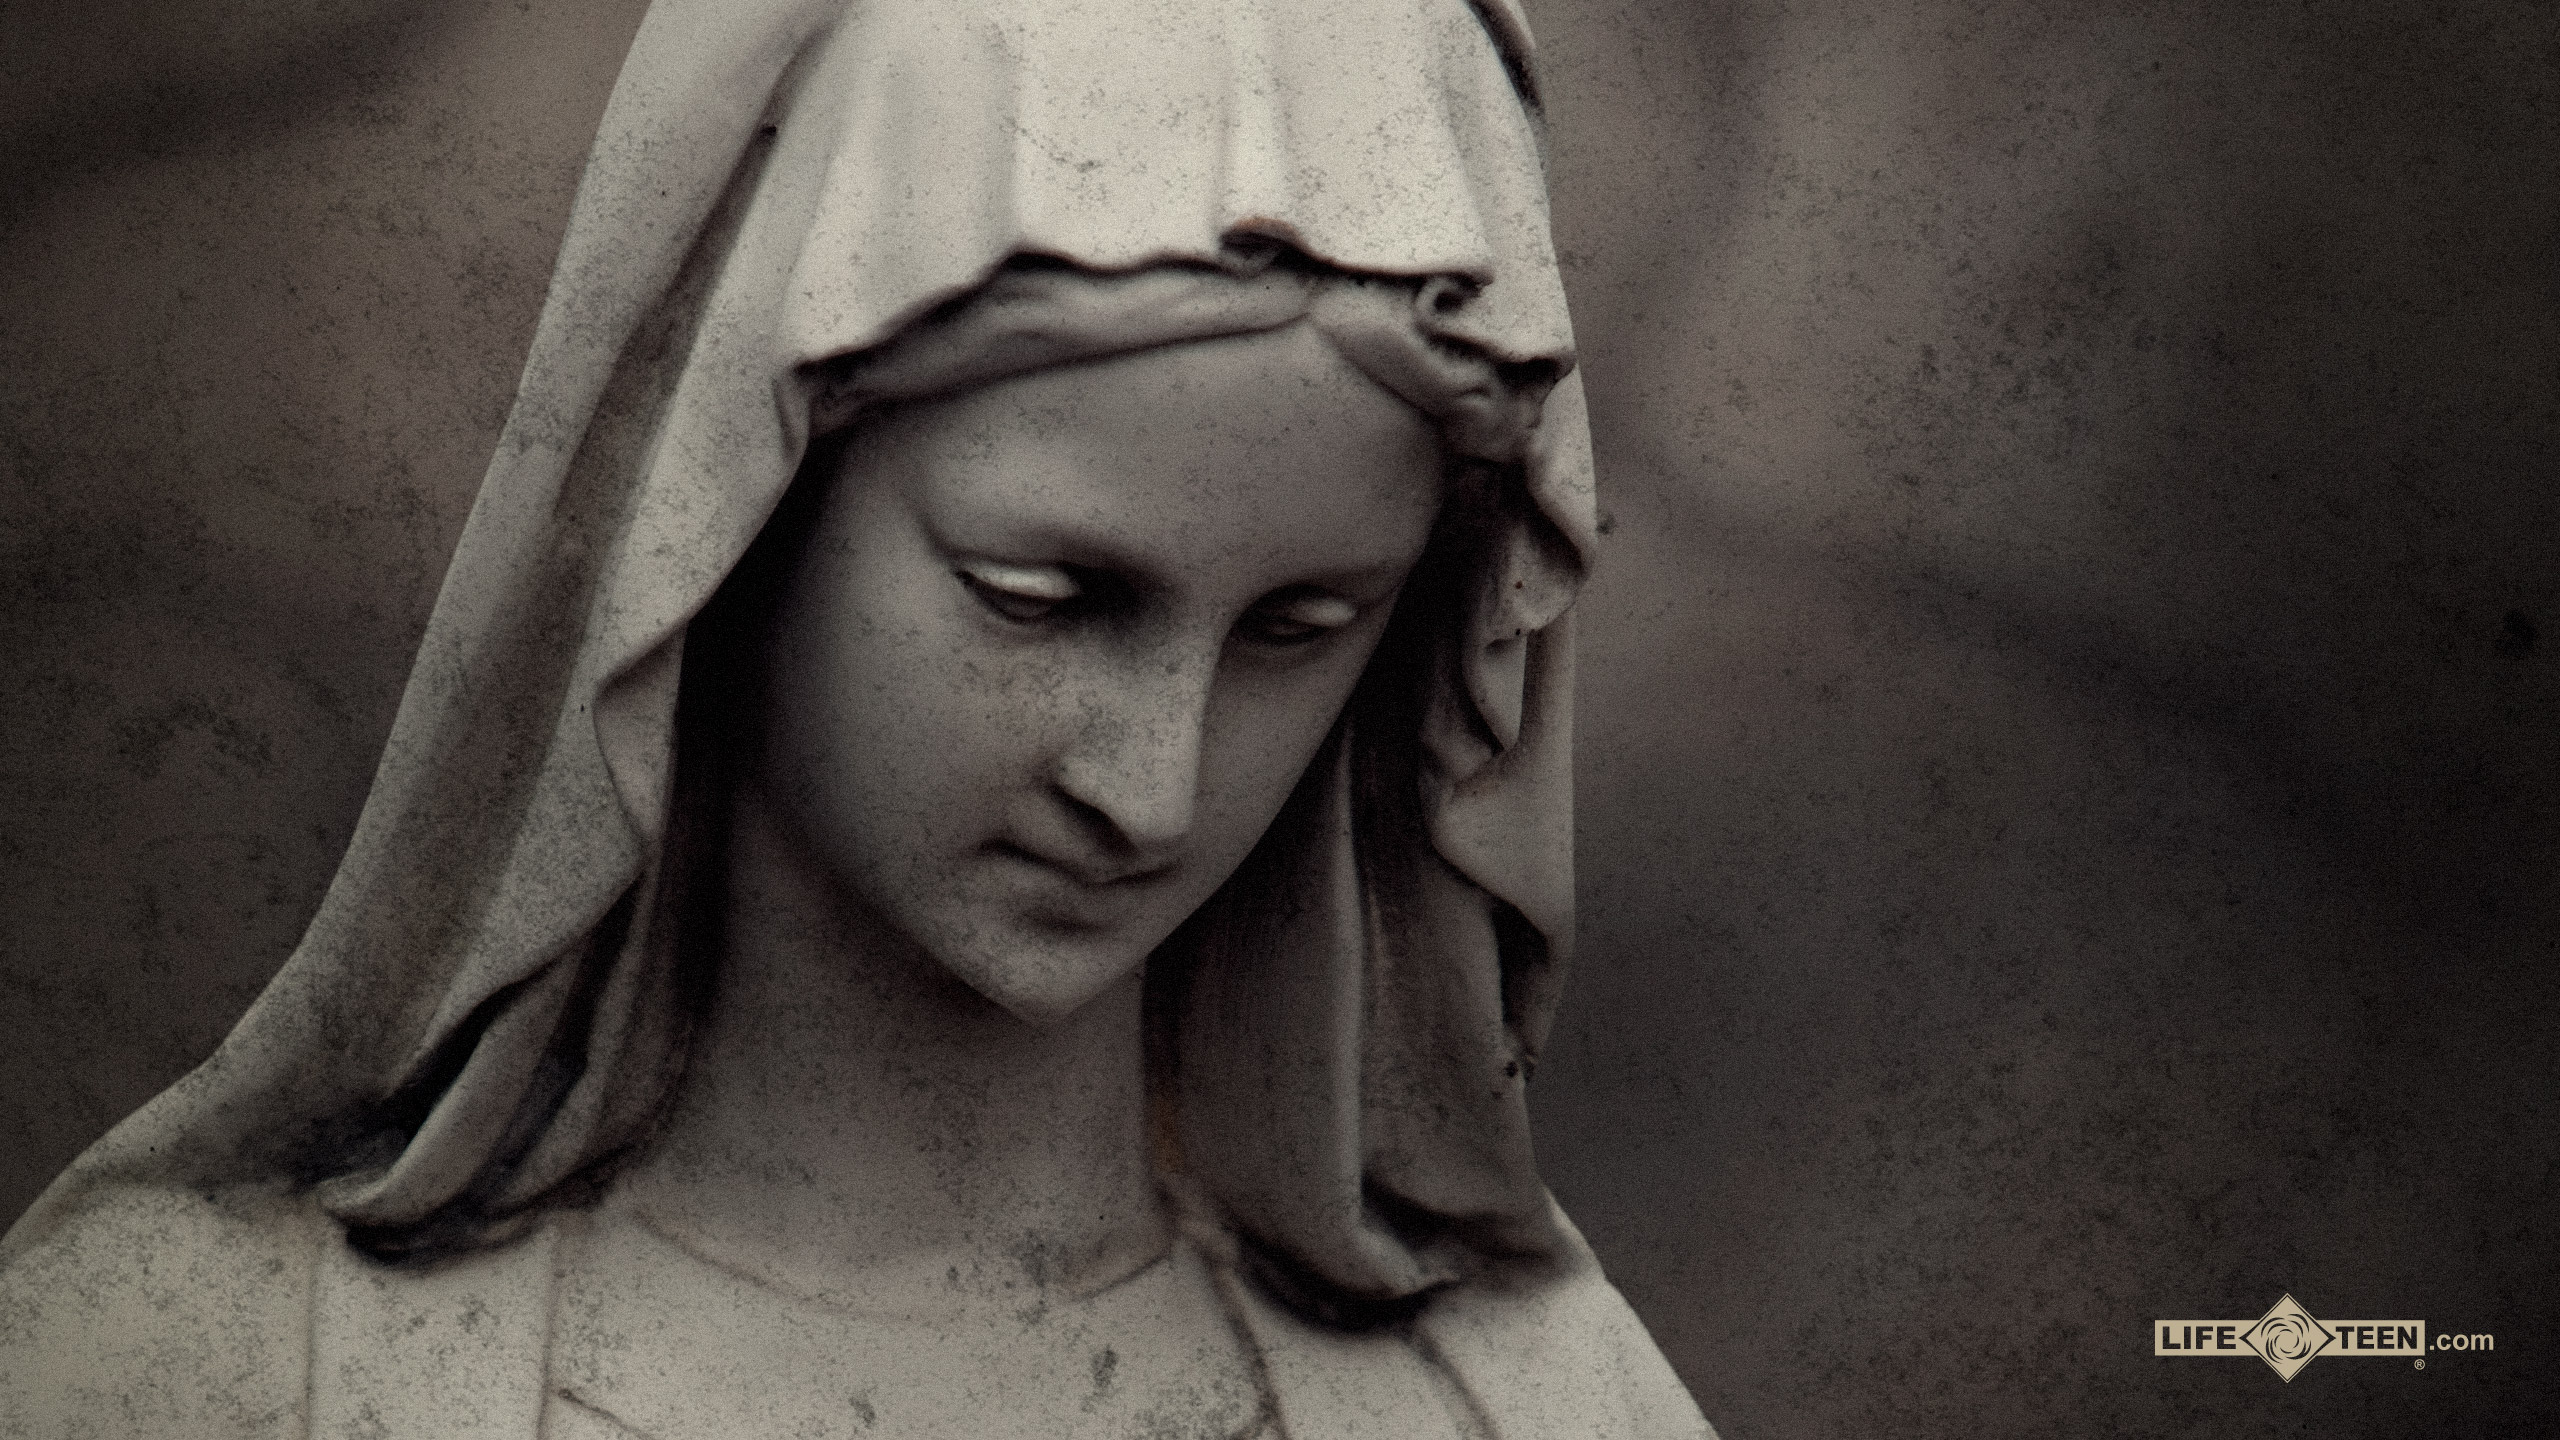 HighResolution Images of the Virgin Mary For Download  Restored Traditions